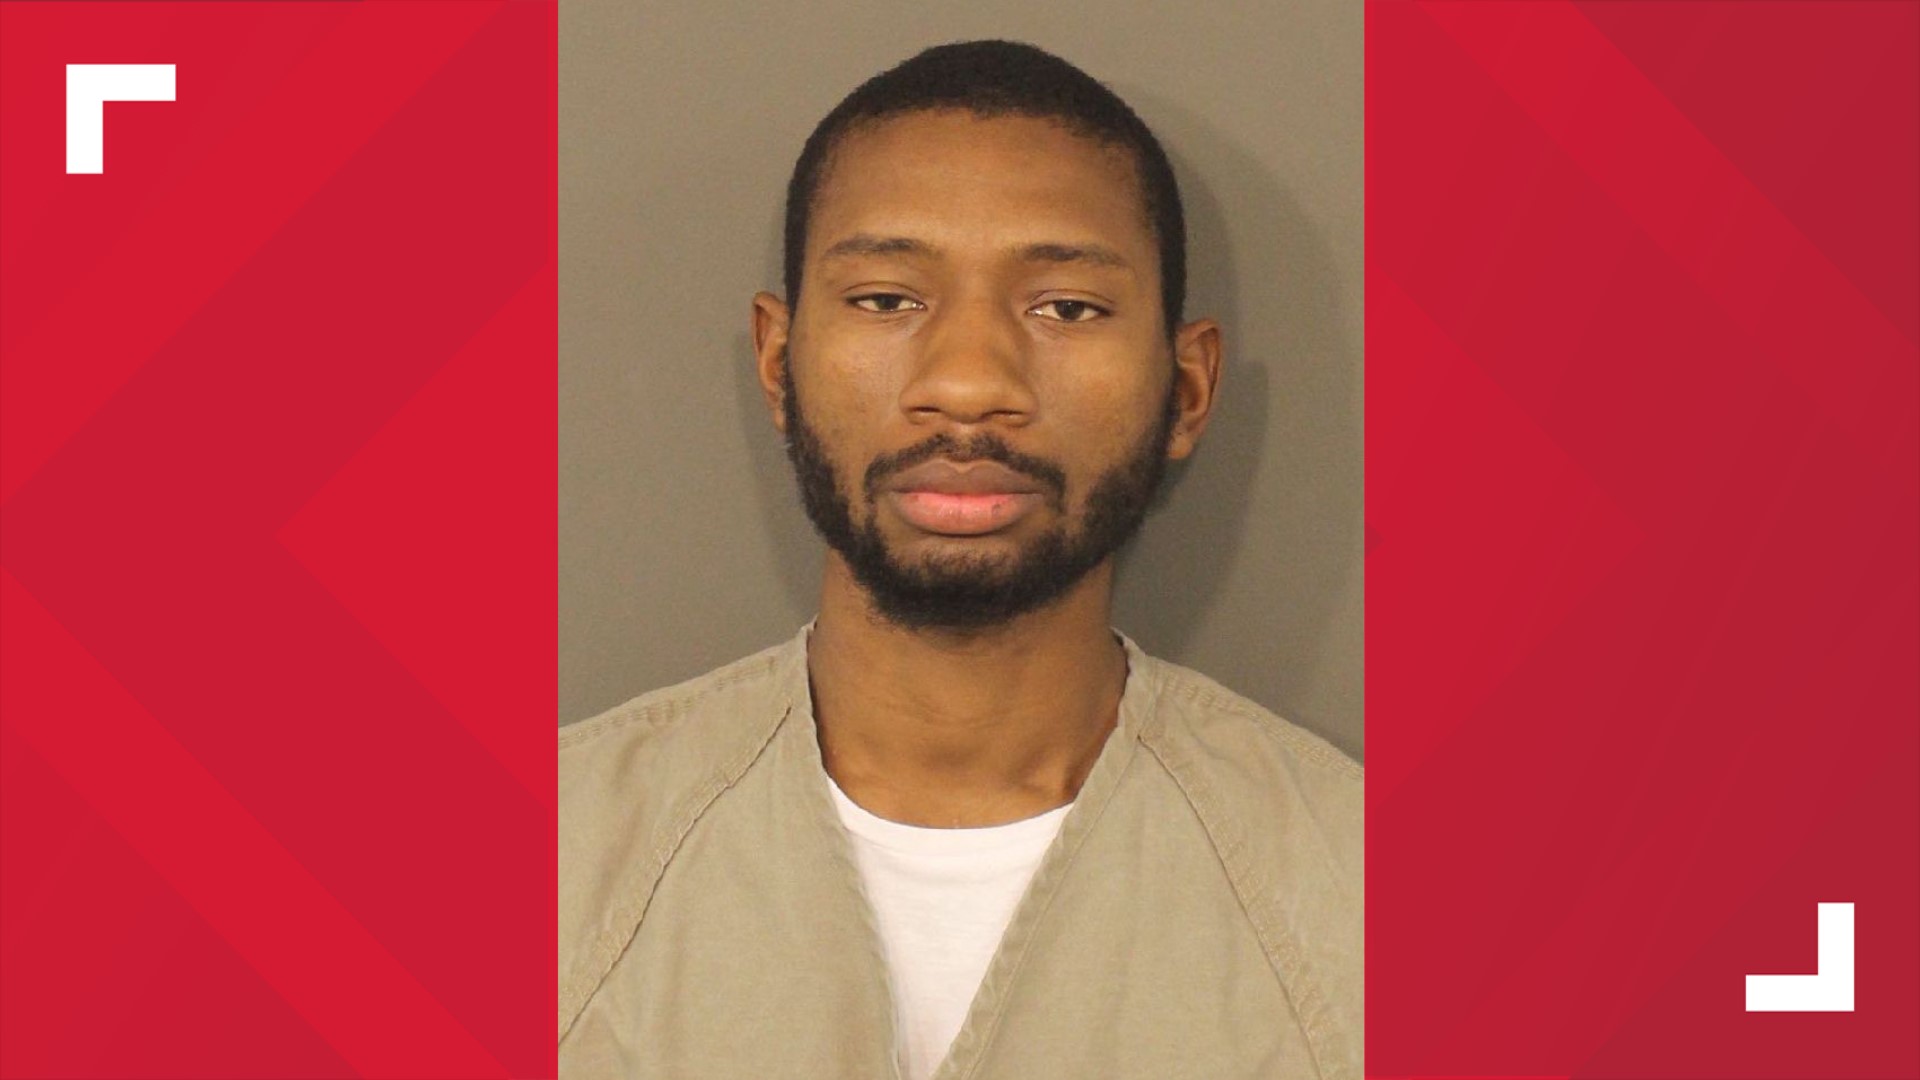 A jury found Christopher Payne guilty last month for shooting a 15-year-old pregnant girl while she was walking with a man in northeast Columbus on Aug. 23, 2020.